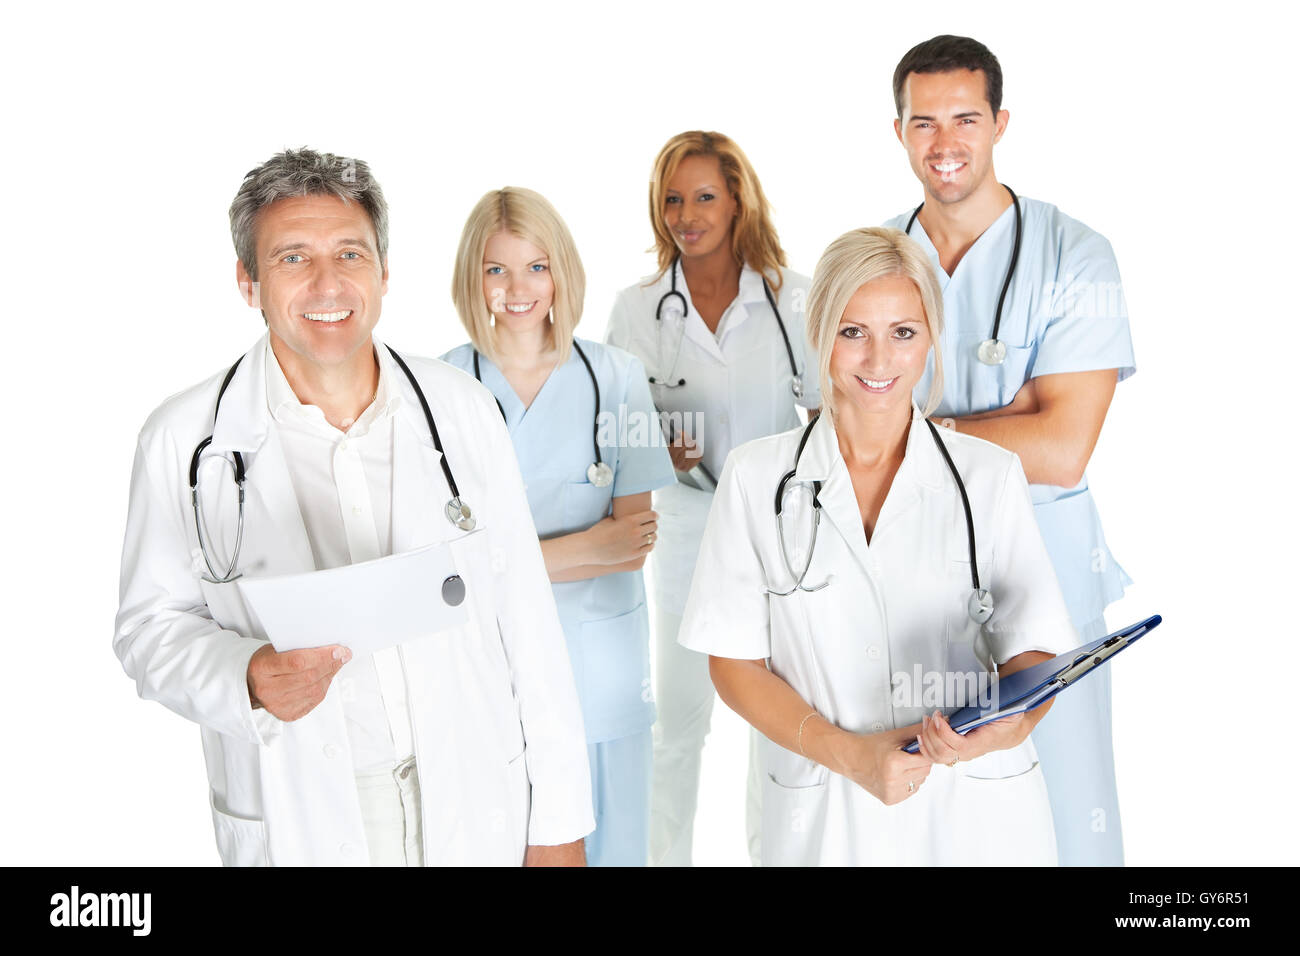 Diverse team of doctors and surgeons on white Stock Photo